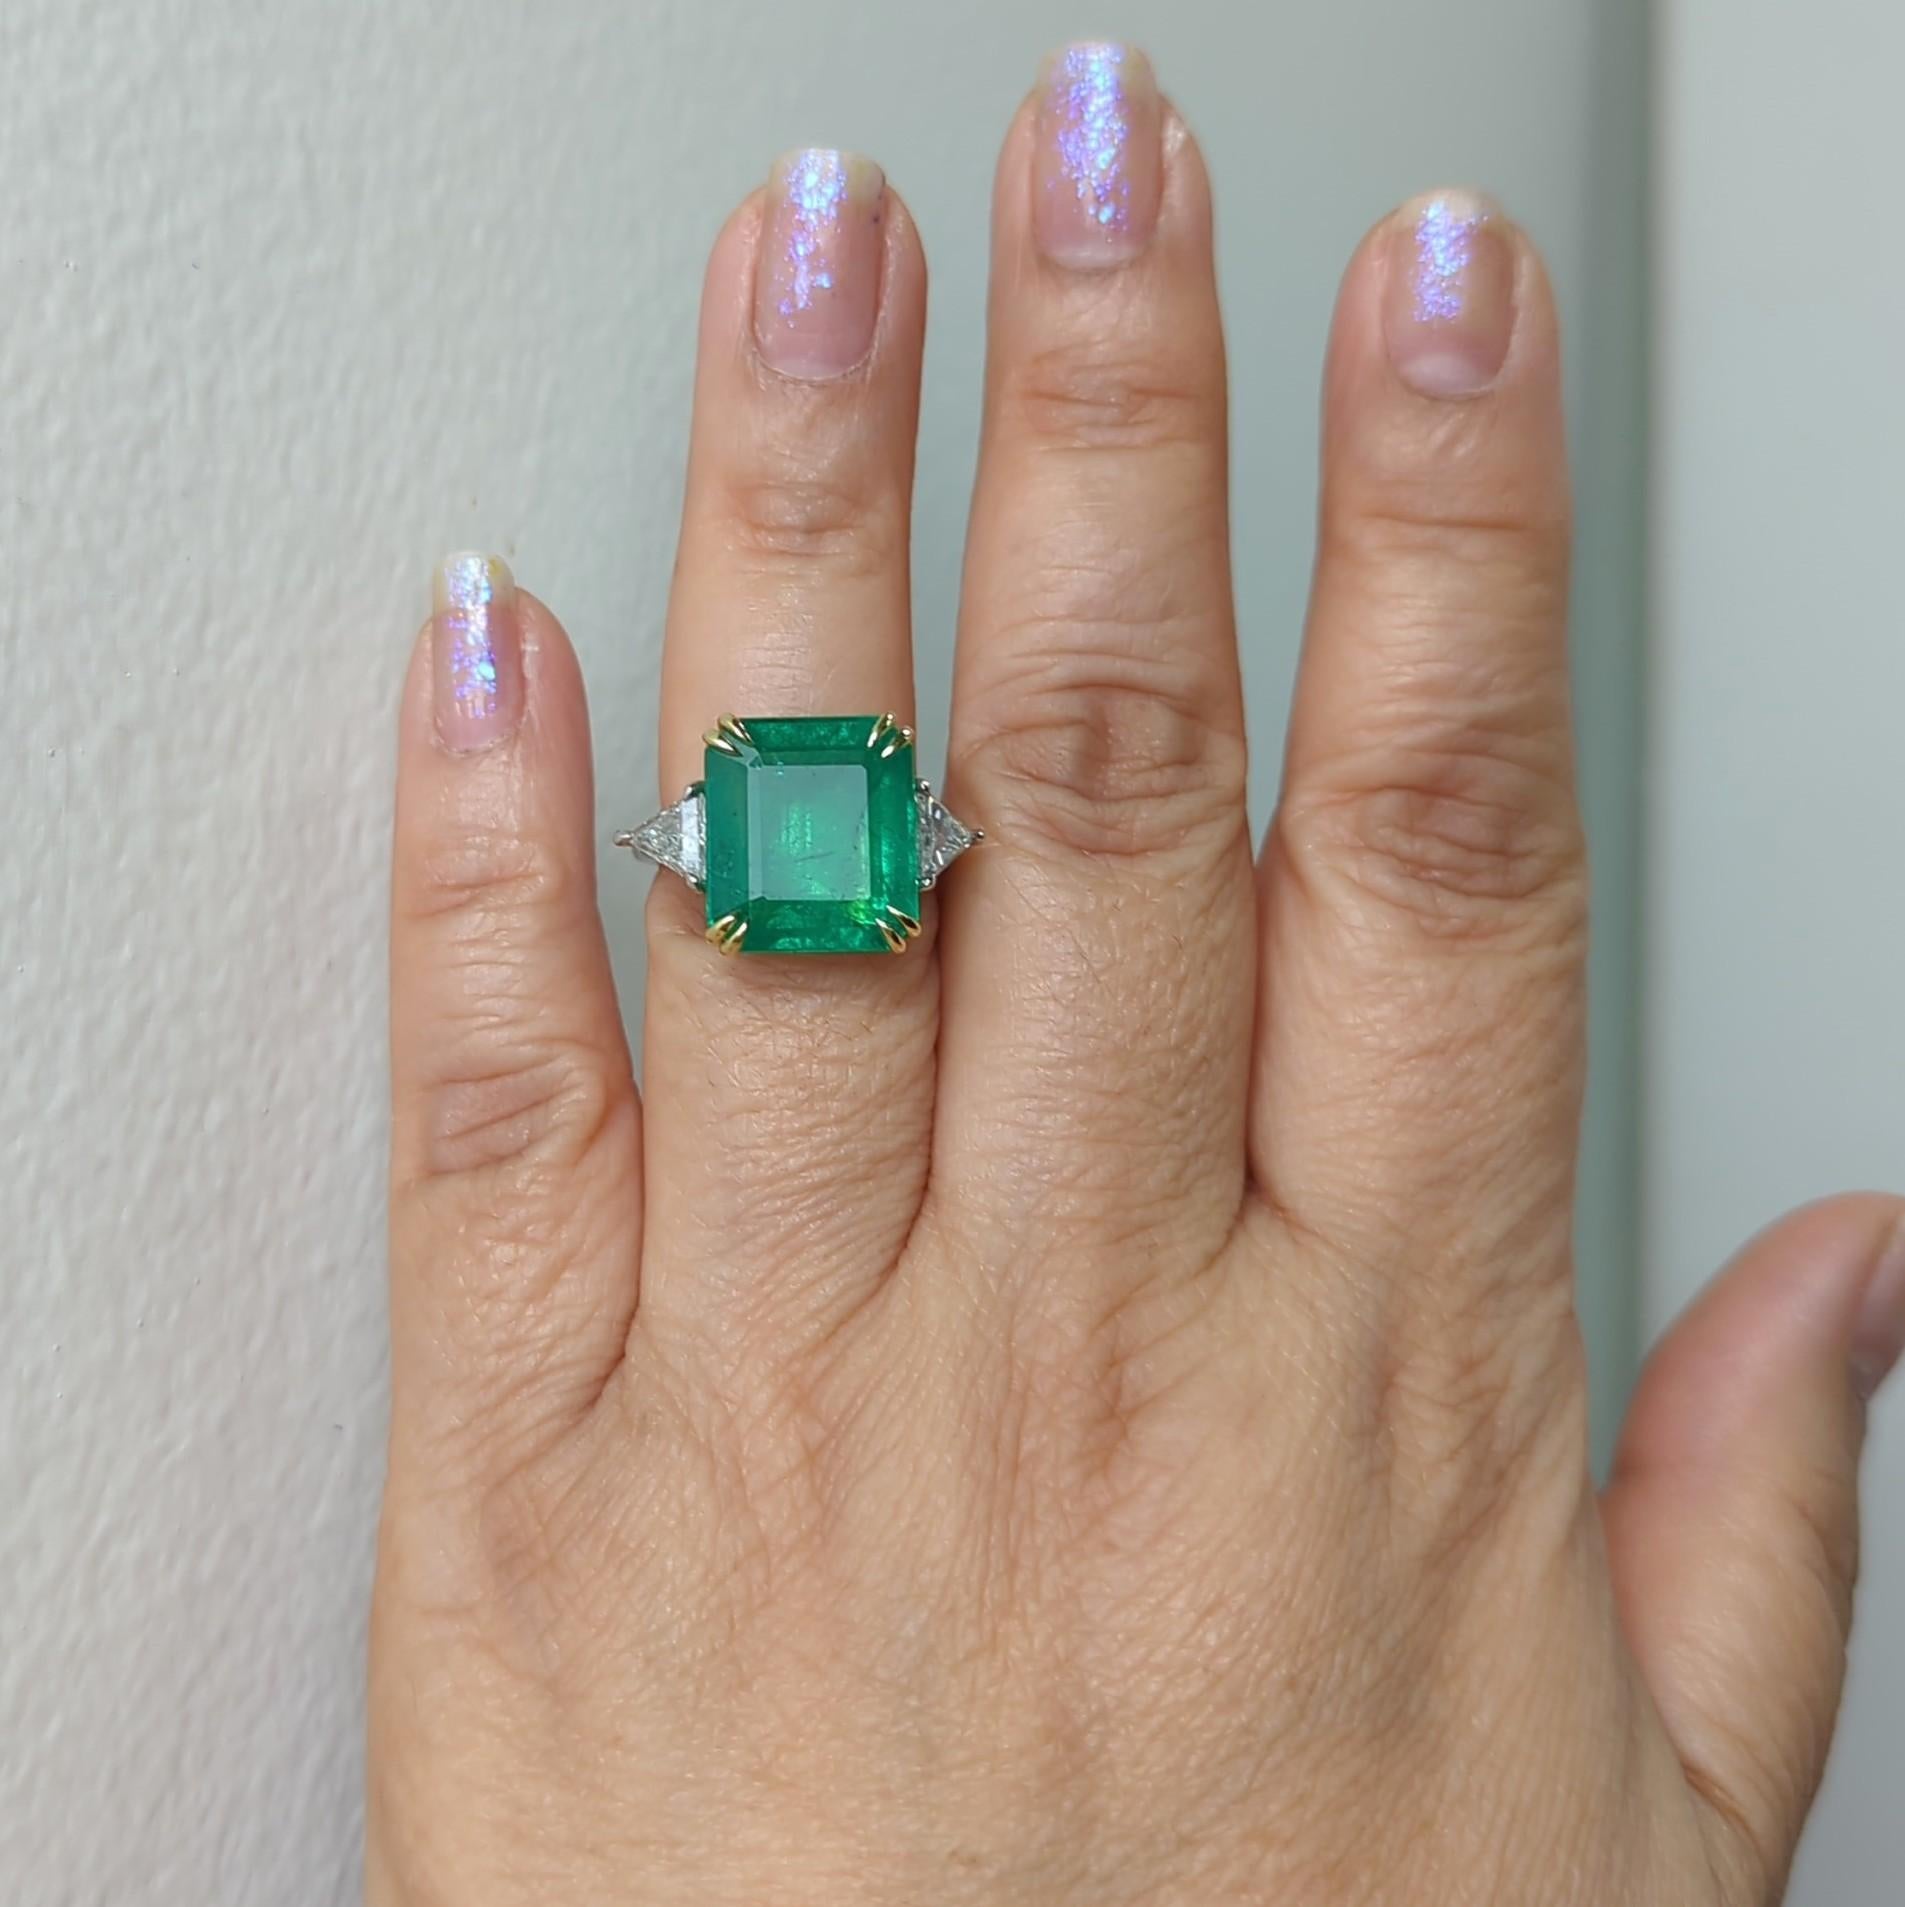 Gorgeous 11.90 ct. emerald emerald cut with 1.02 ct. good quality, white, and bright diamond trillions.  Handmade in platinum and 18k yellow gold.  Ring size 6.5.